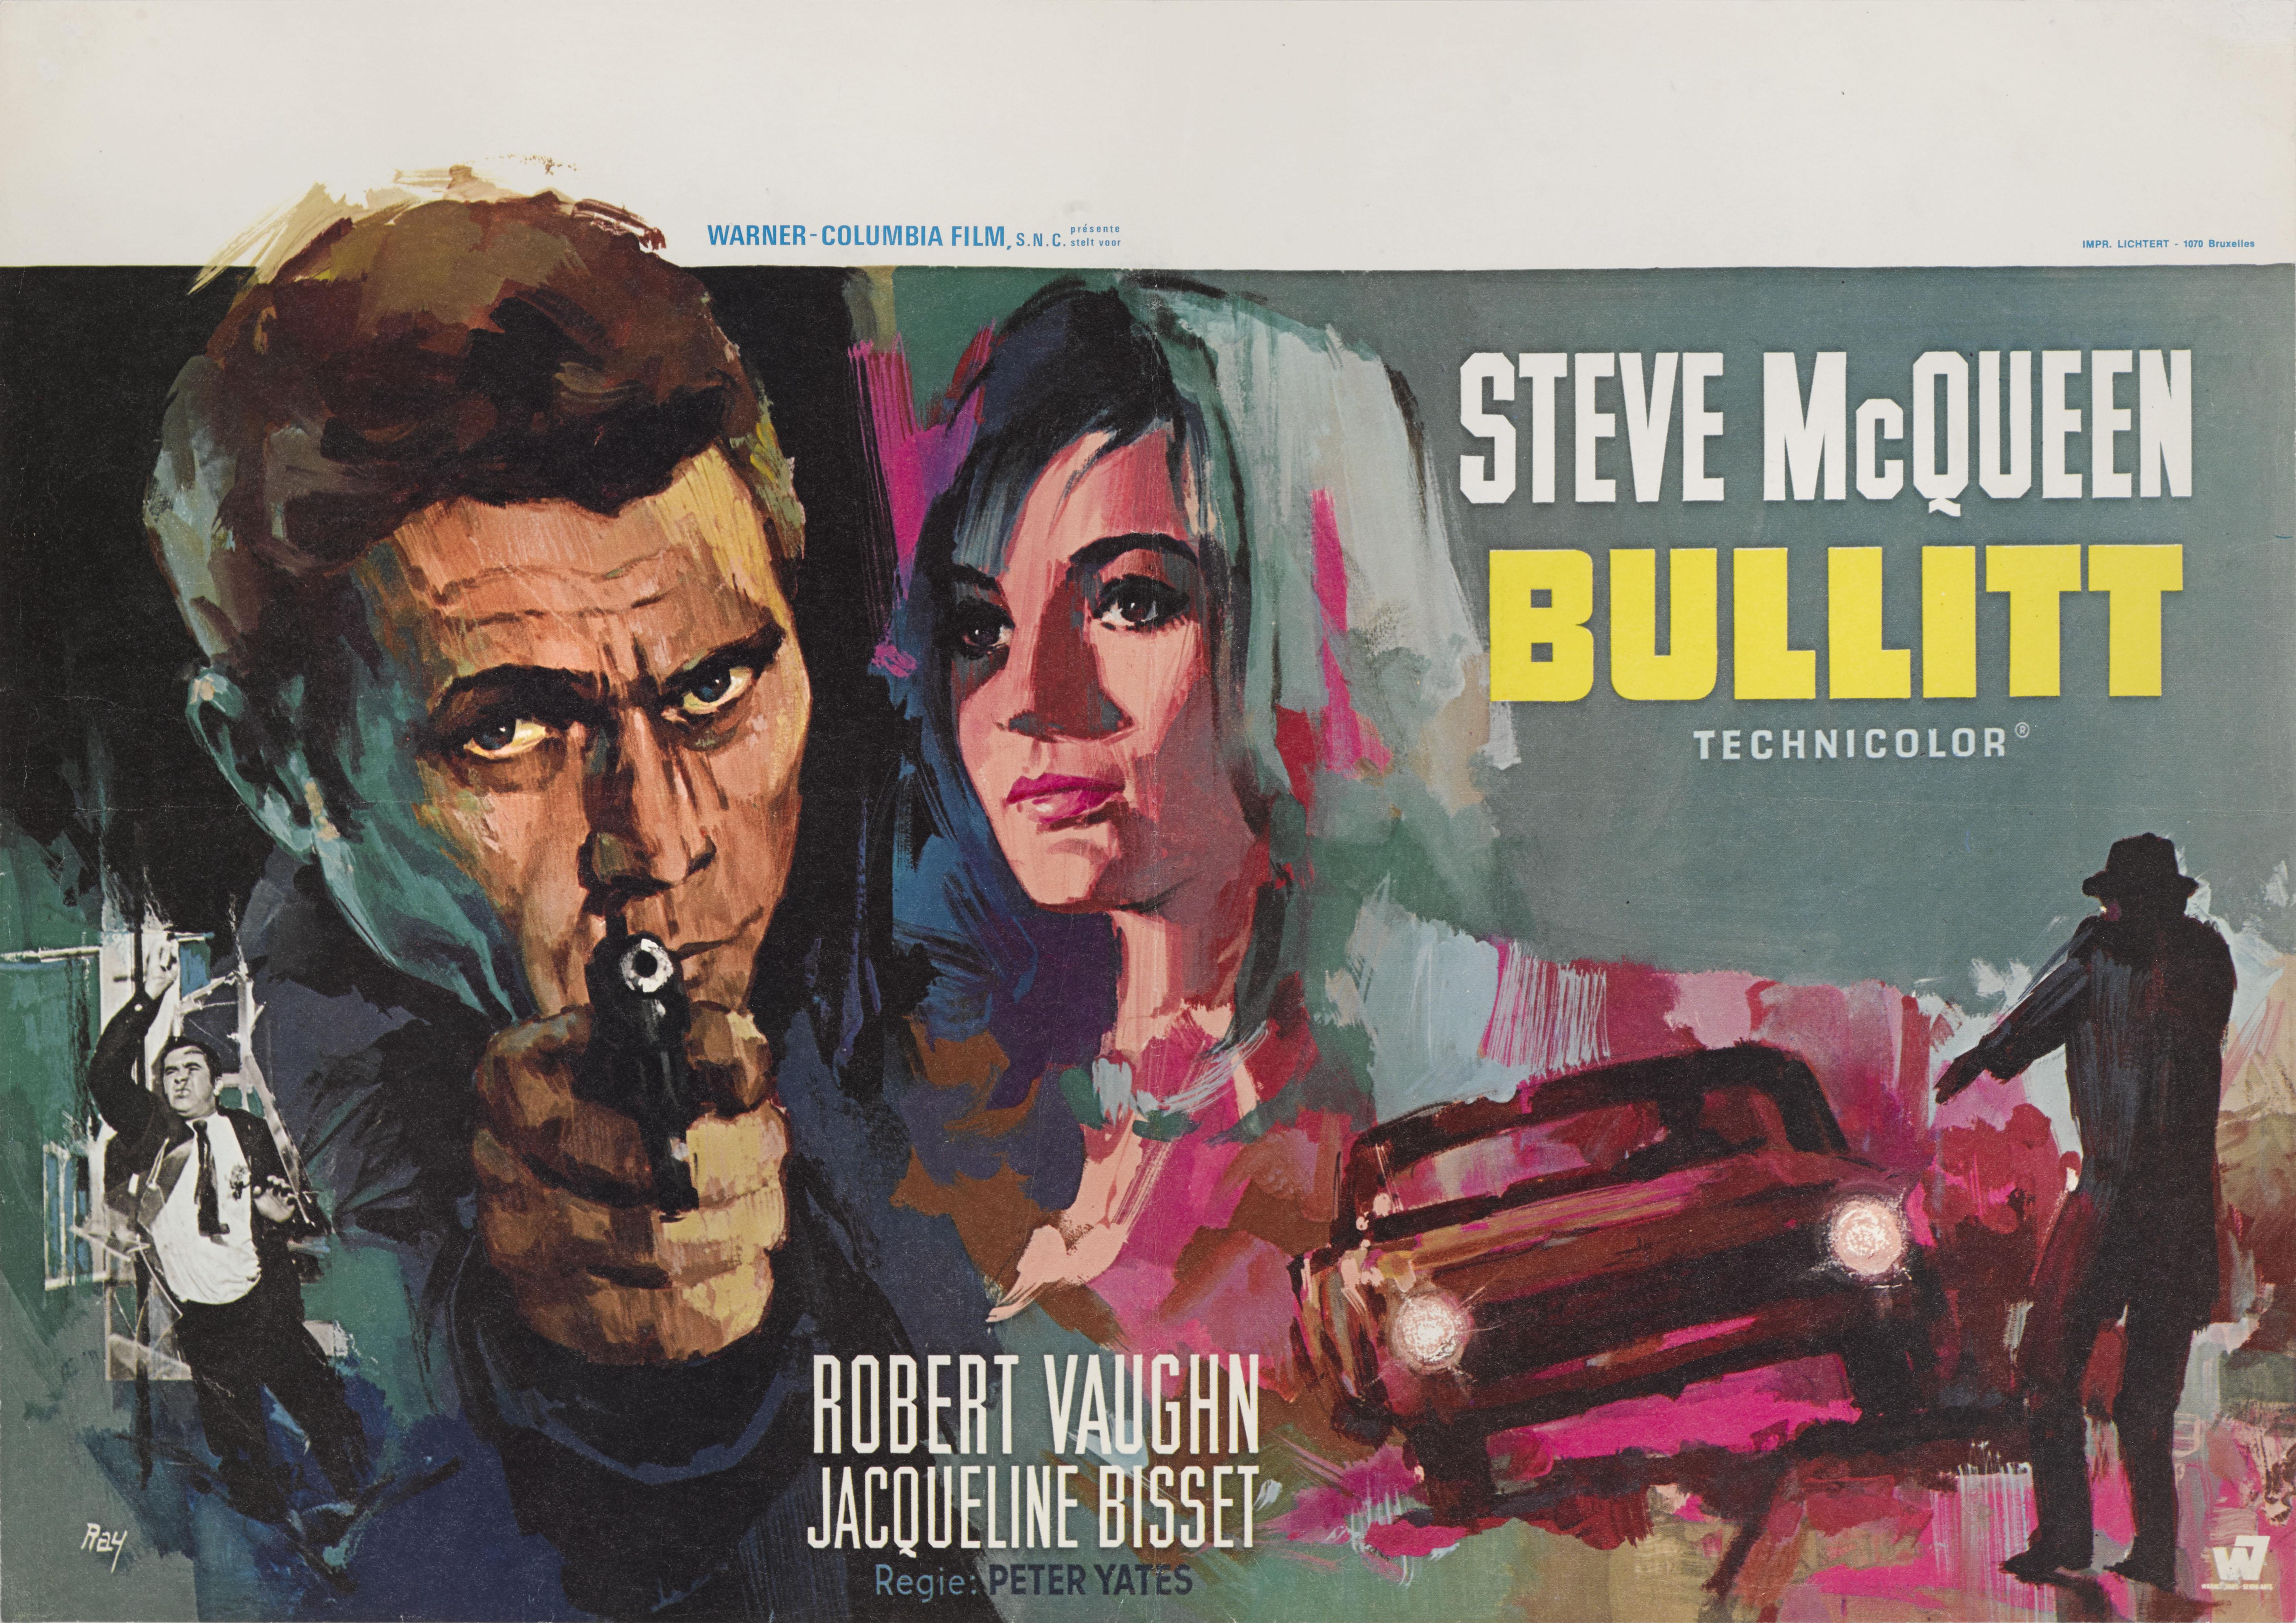 Original Belgian film poster for the action thriller directed by Peter Yates, and stars Steve McQueen, Robert Vaughn and Jacqueline Bisset. It is undoubtedly Steve McQueen's most famous role, where he plays San Francisco Police Lieutenant Frank